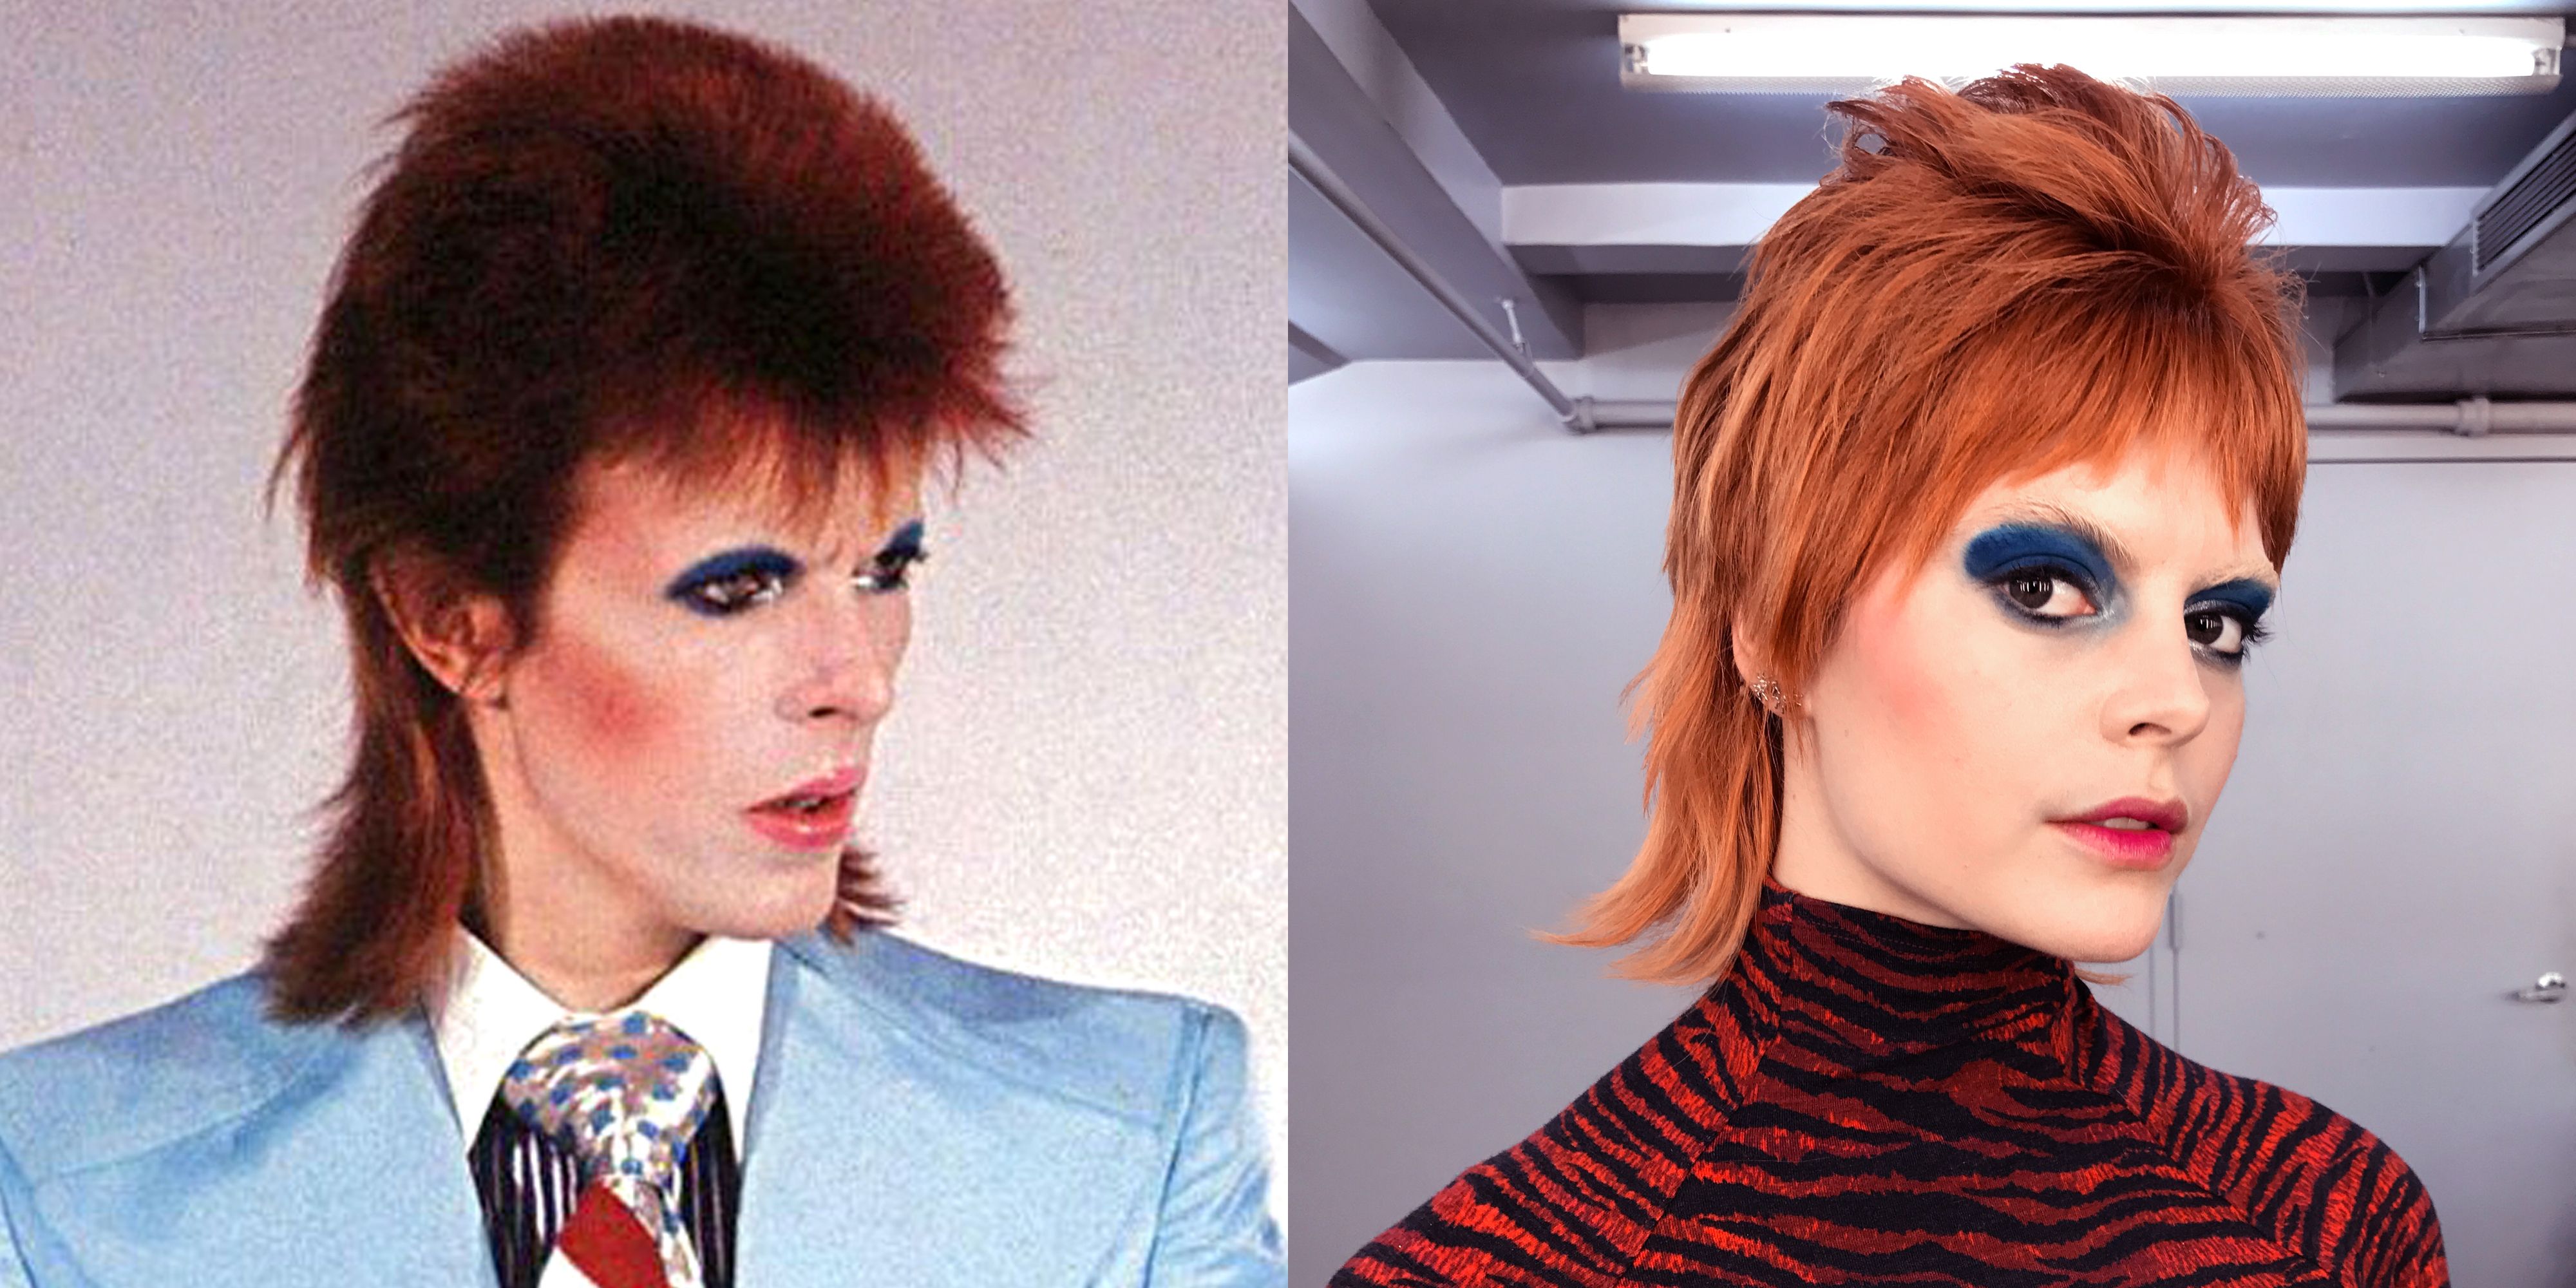 How To Dress Like David Bowie For Halloween David Bowie Costume Look Photos